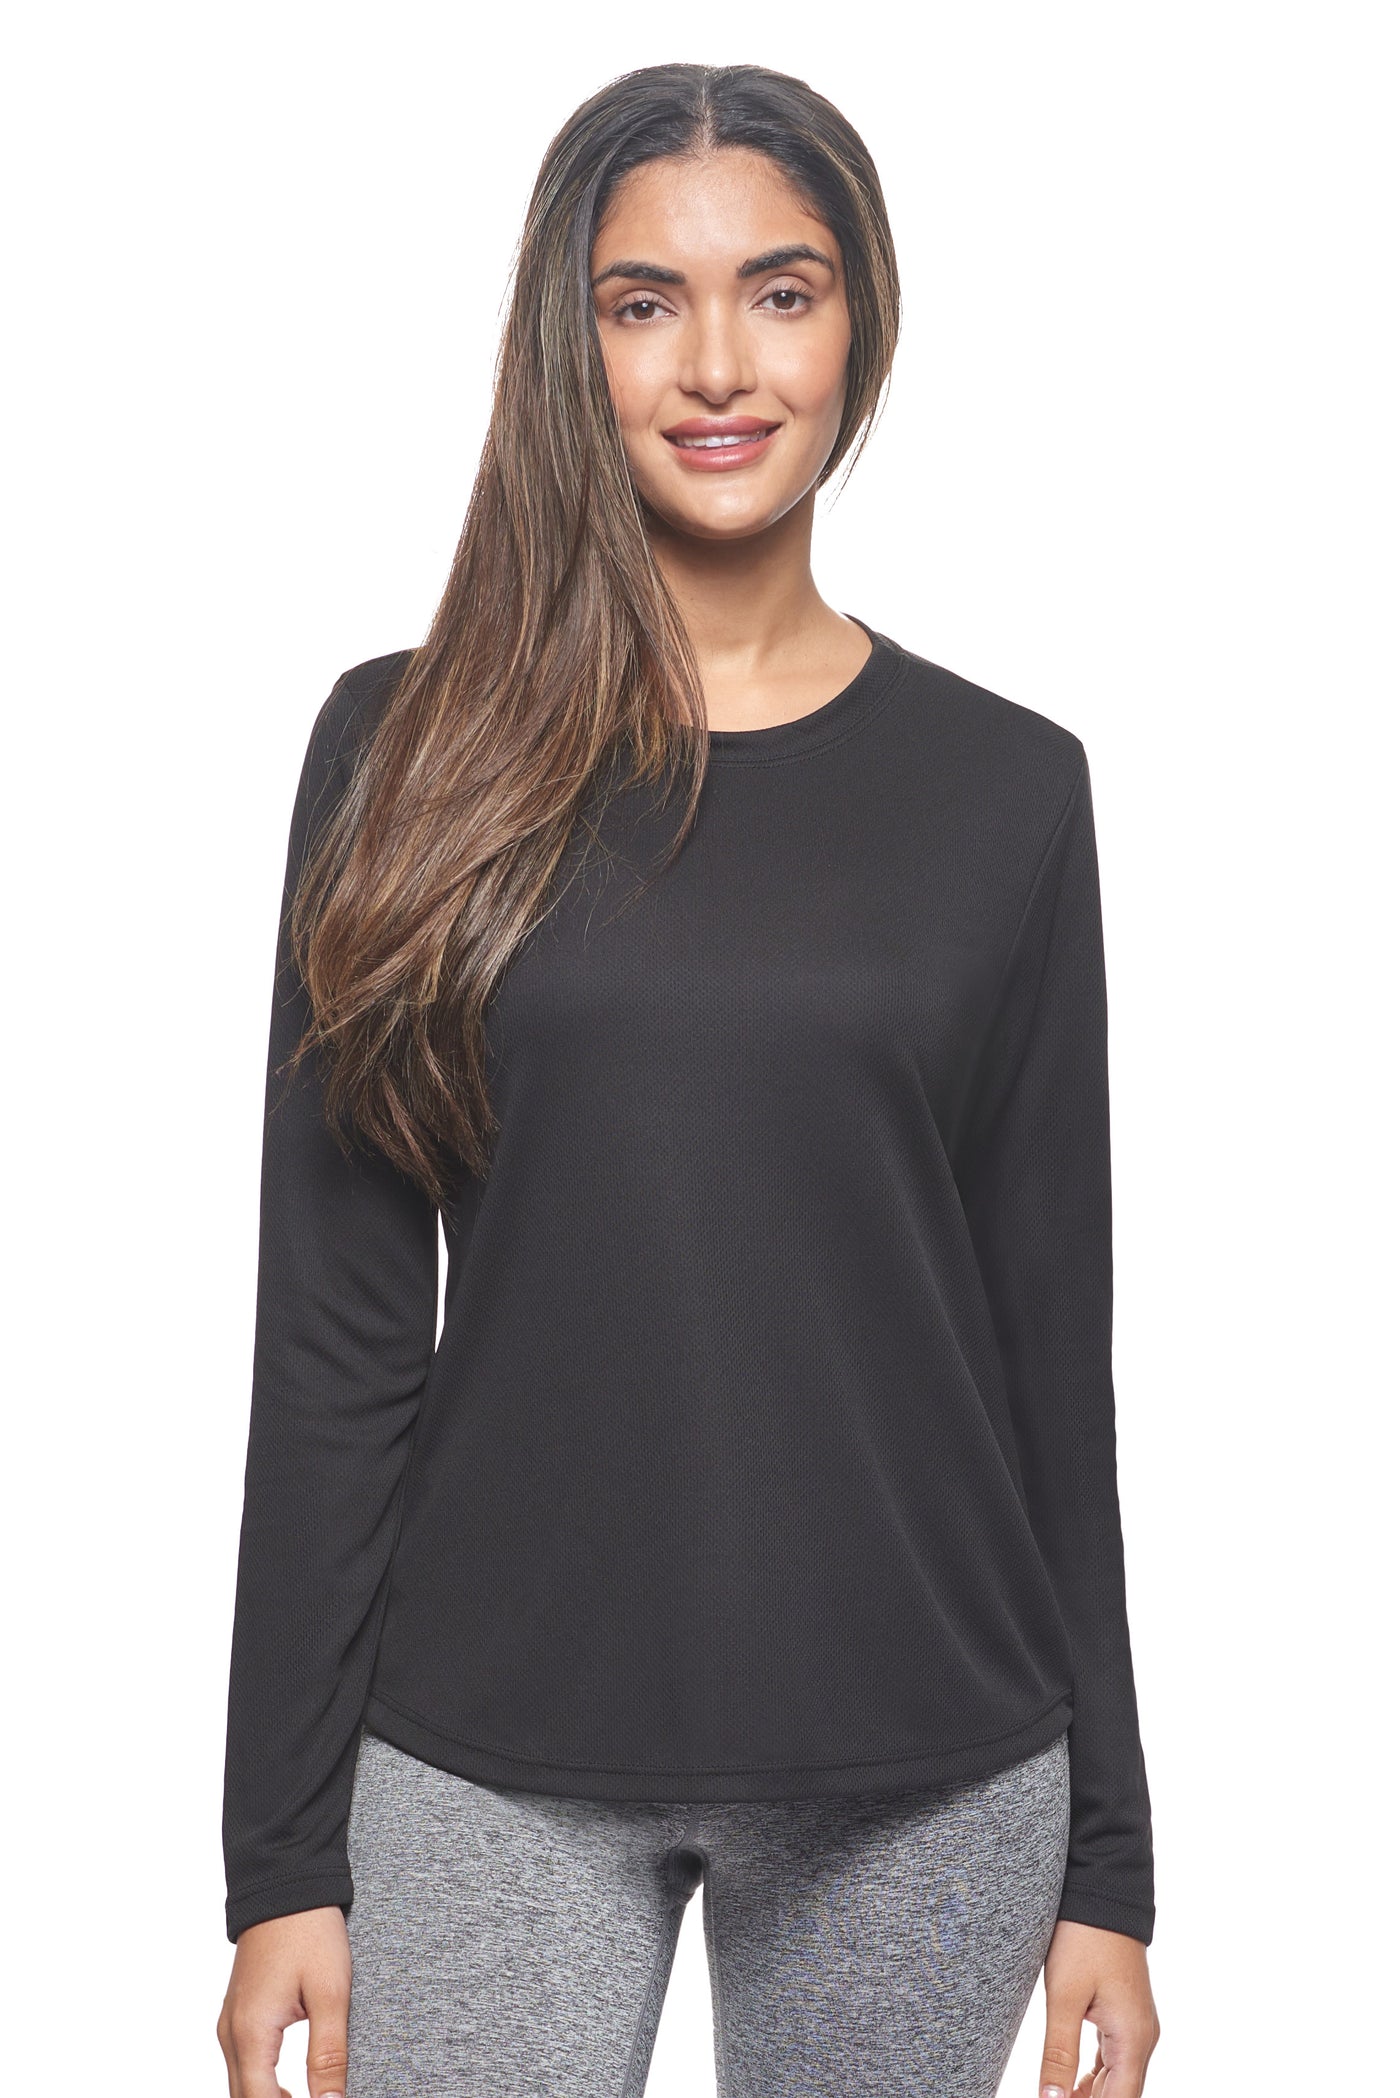 Expert Brand Retail Women's Long Sleeve Crewneck Tec Tee Made in USA Oxymesh#color_black